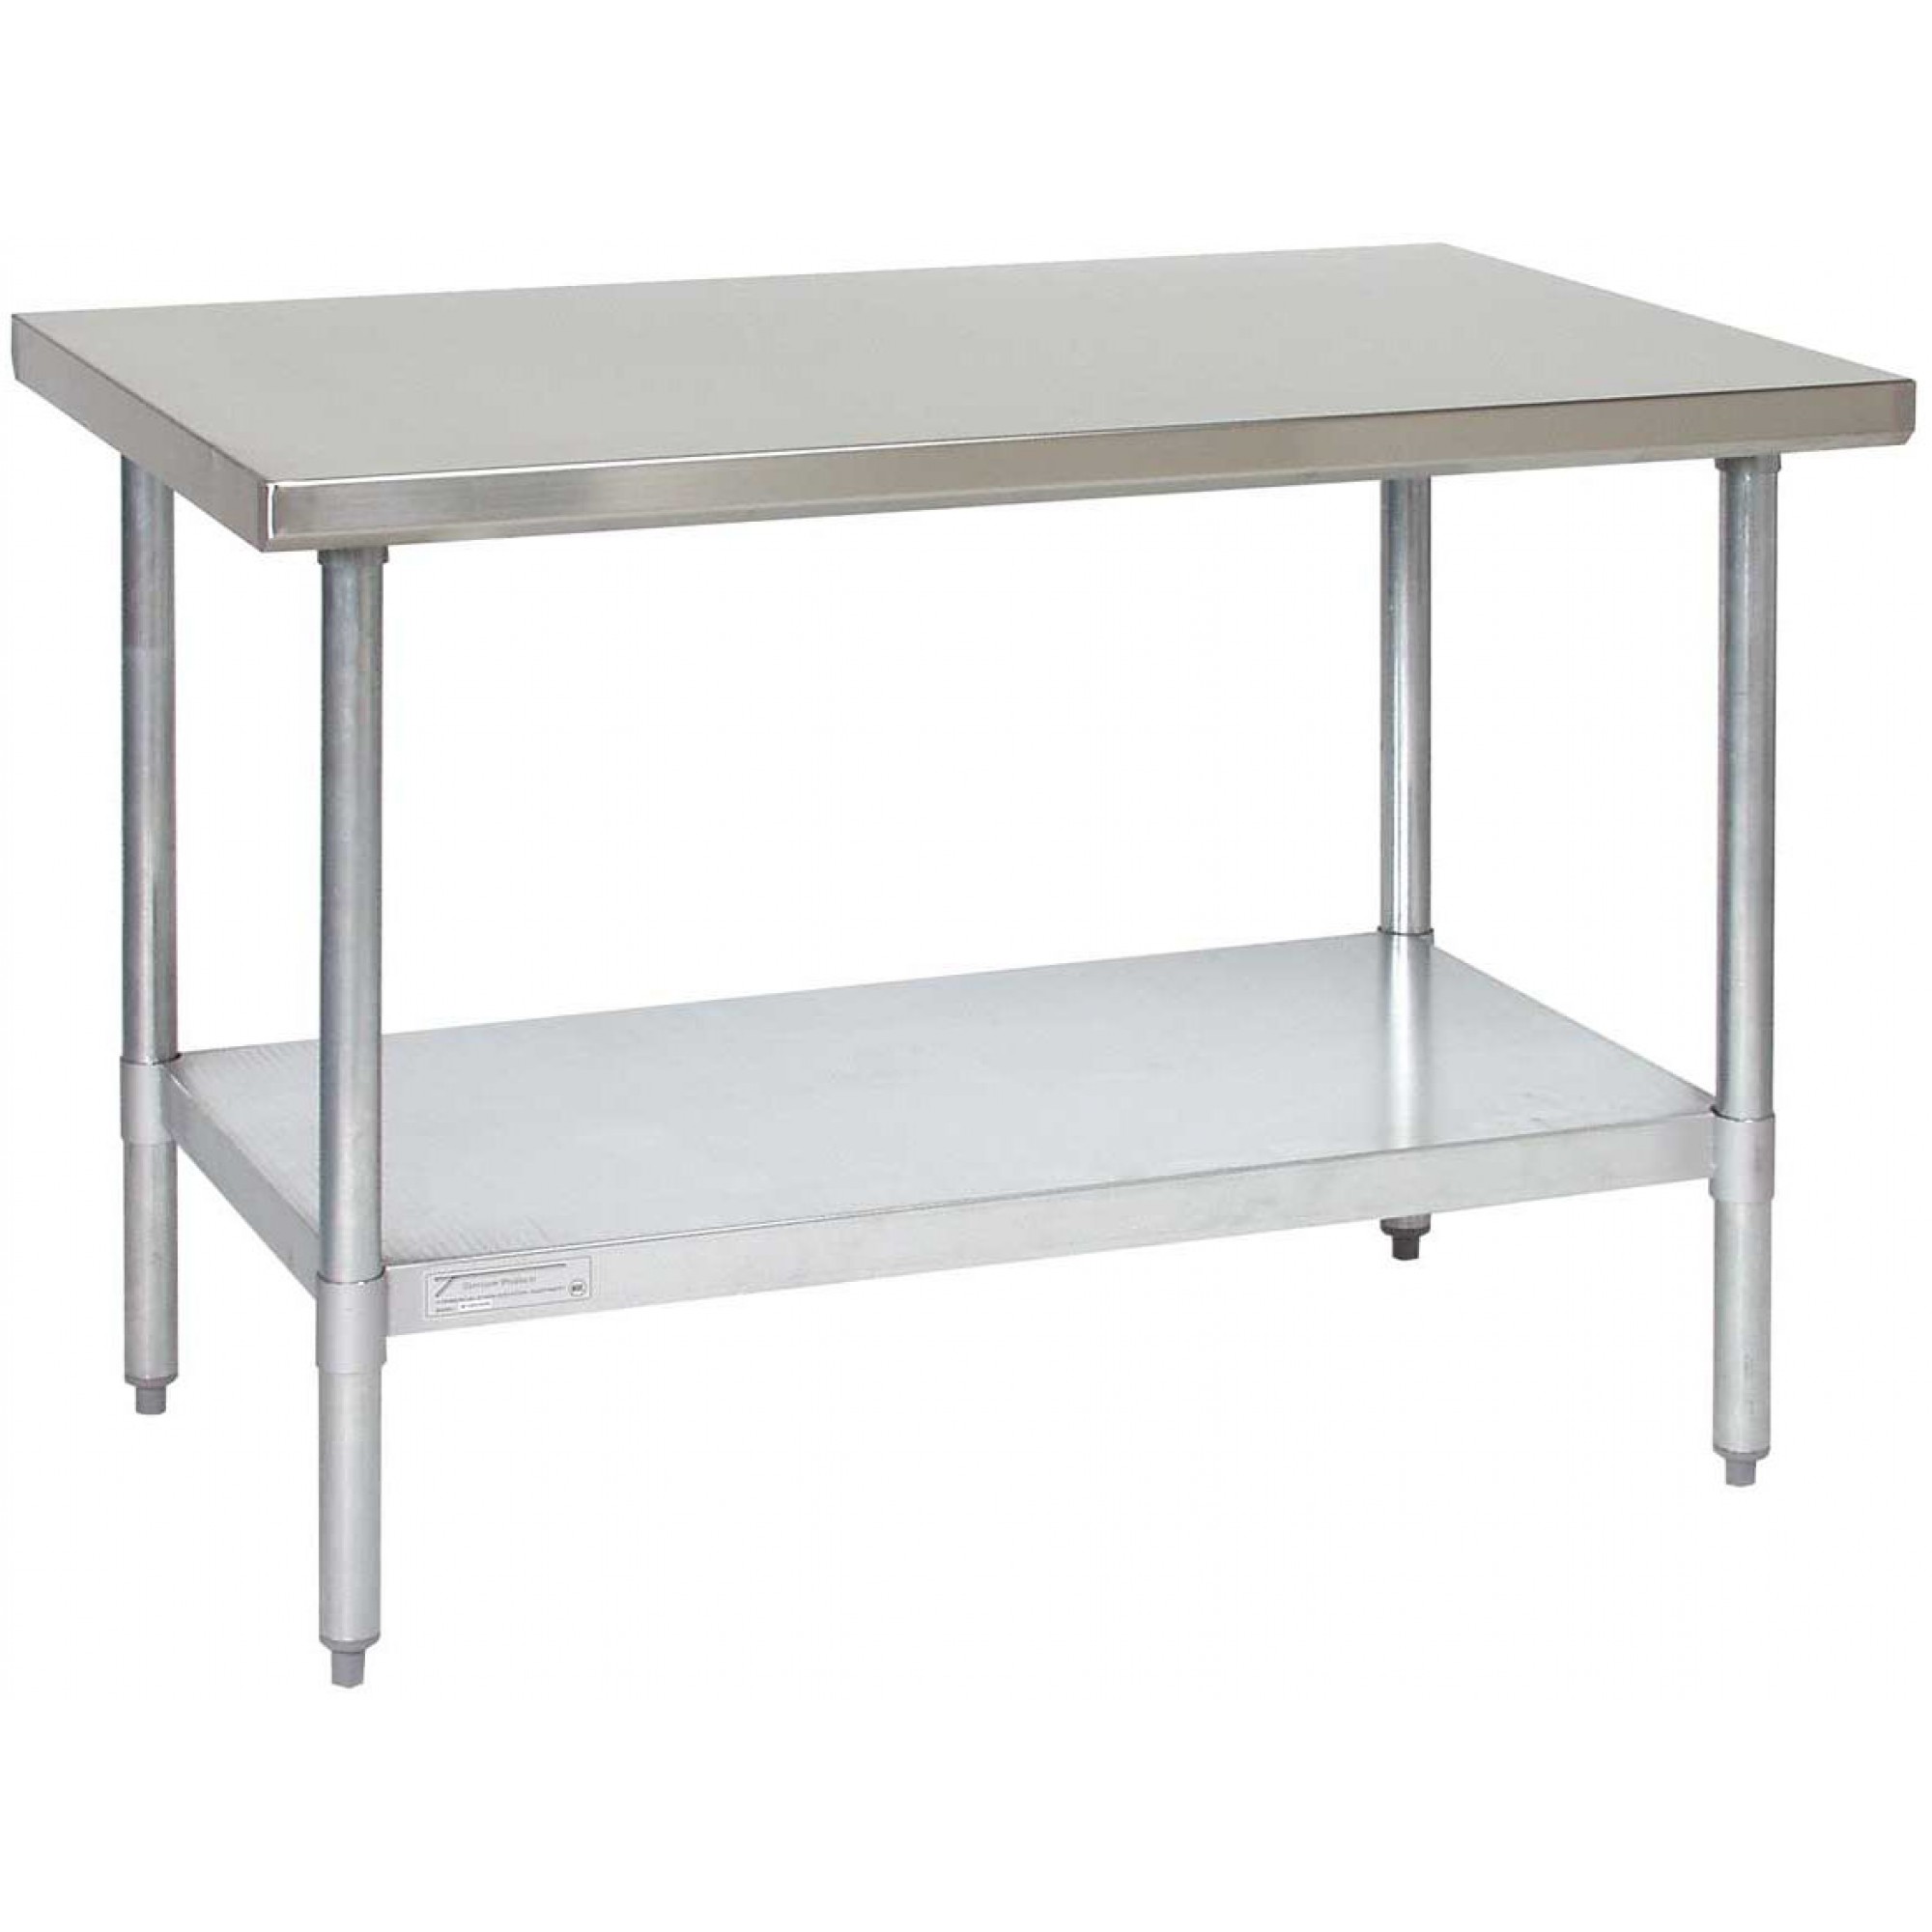 Tarrison Stainless Steel Work Table with Shelf